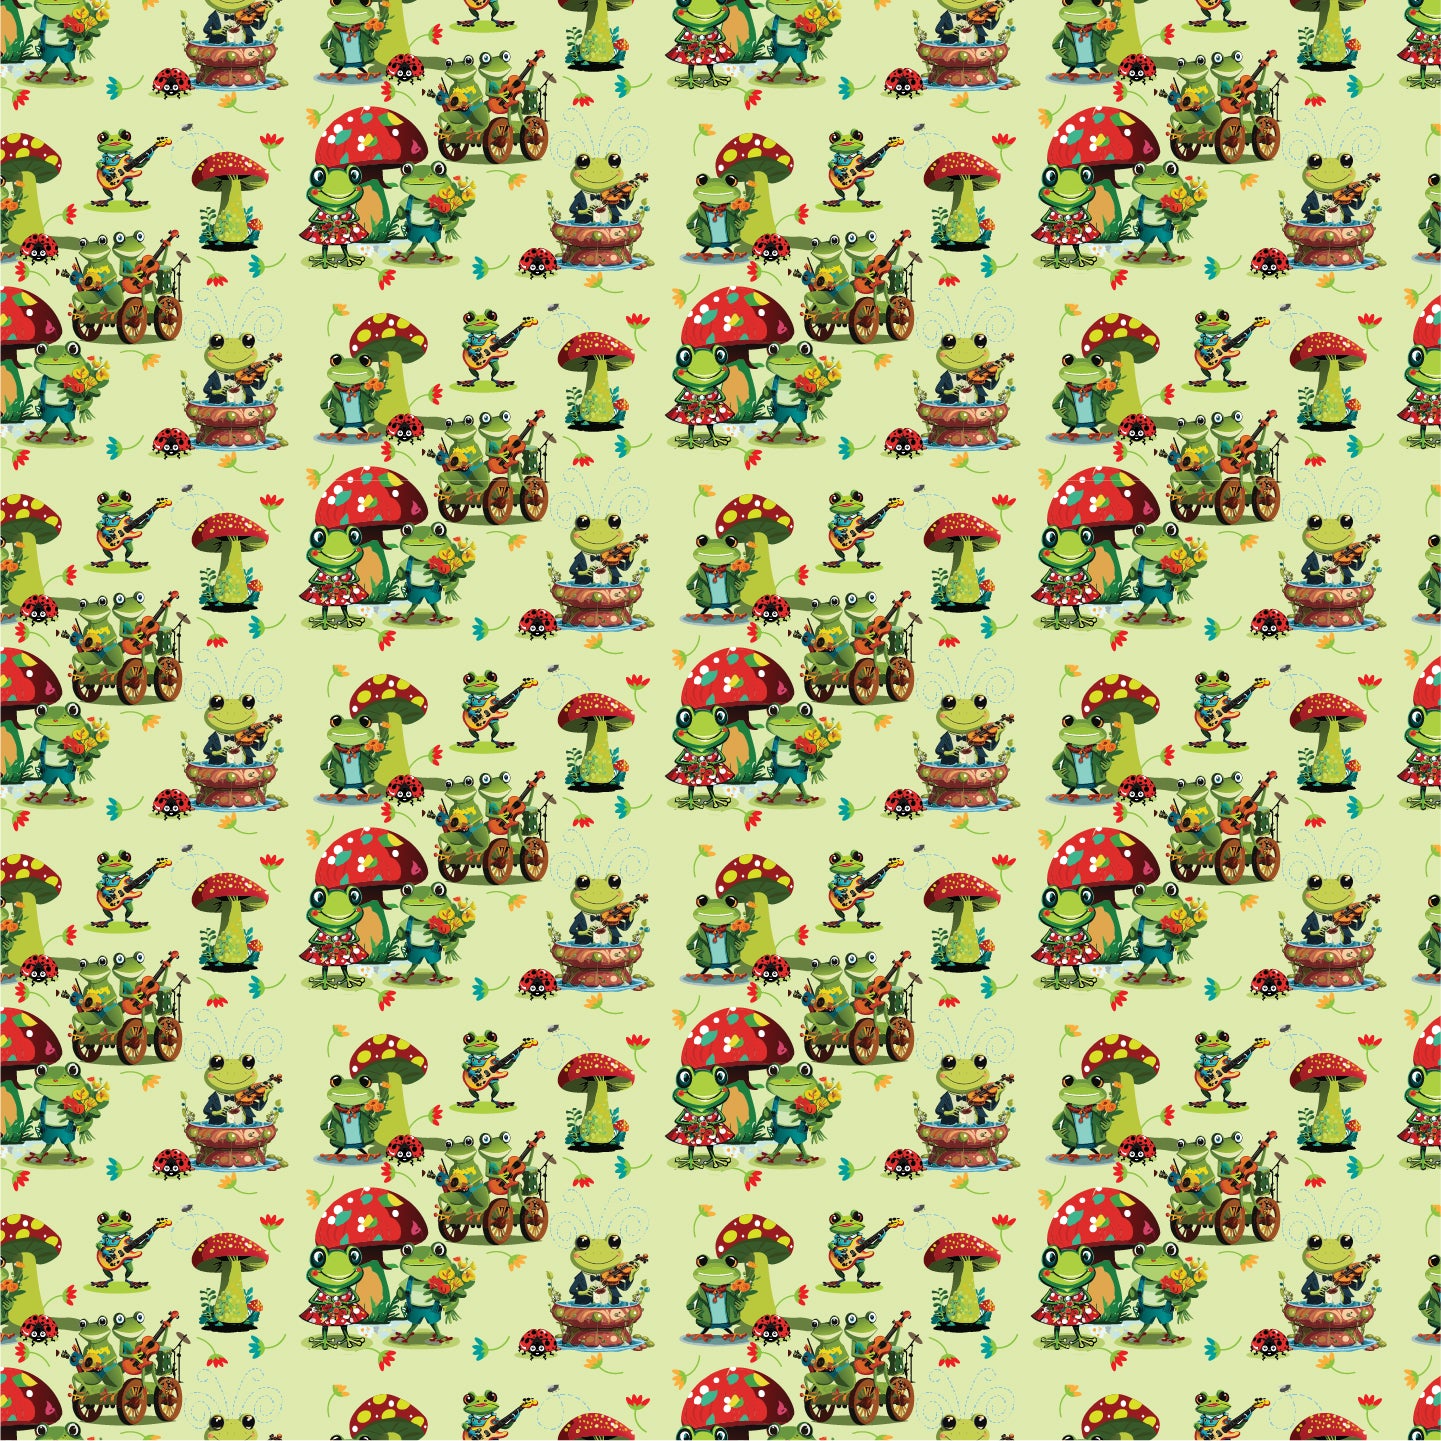 Frog Friends Wrapping Paper, 29"x20", 5 sheets, heavy duty and peek proof